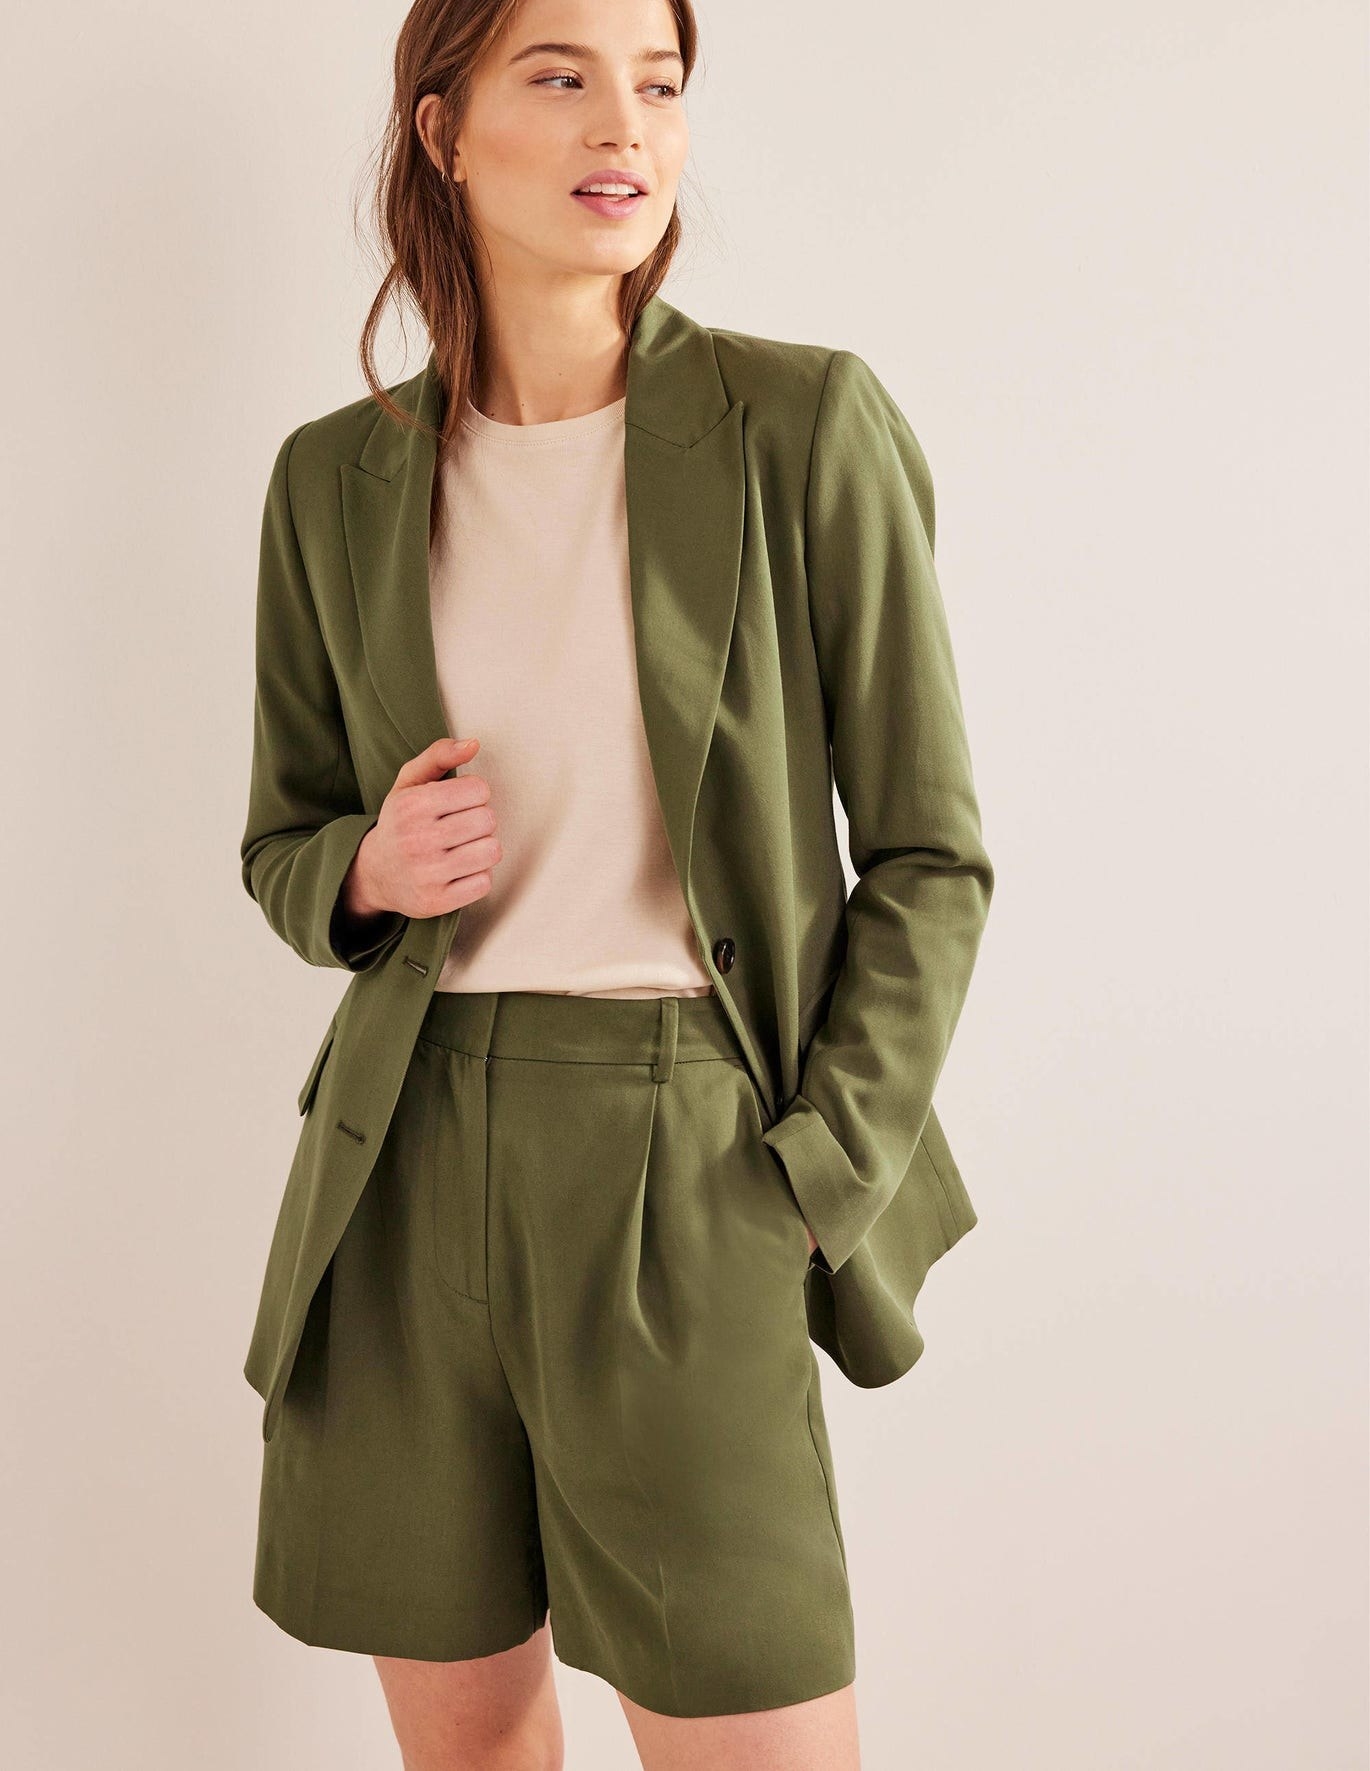 model in olive green relaxed dress shorts with a matching blazer